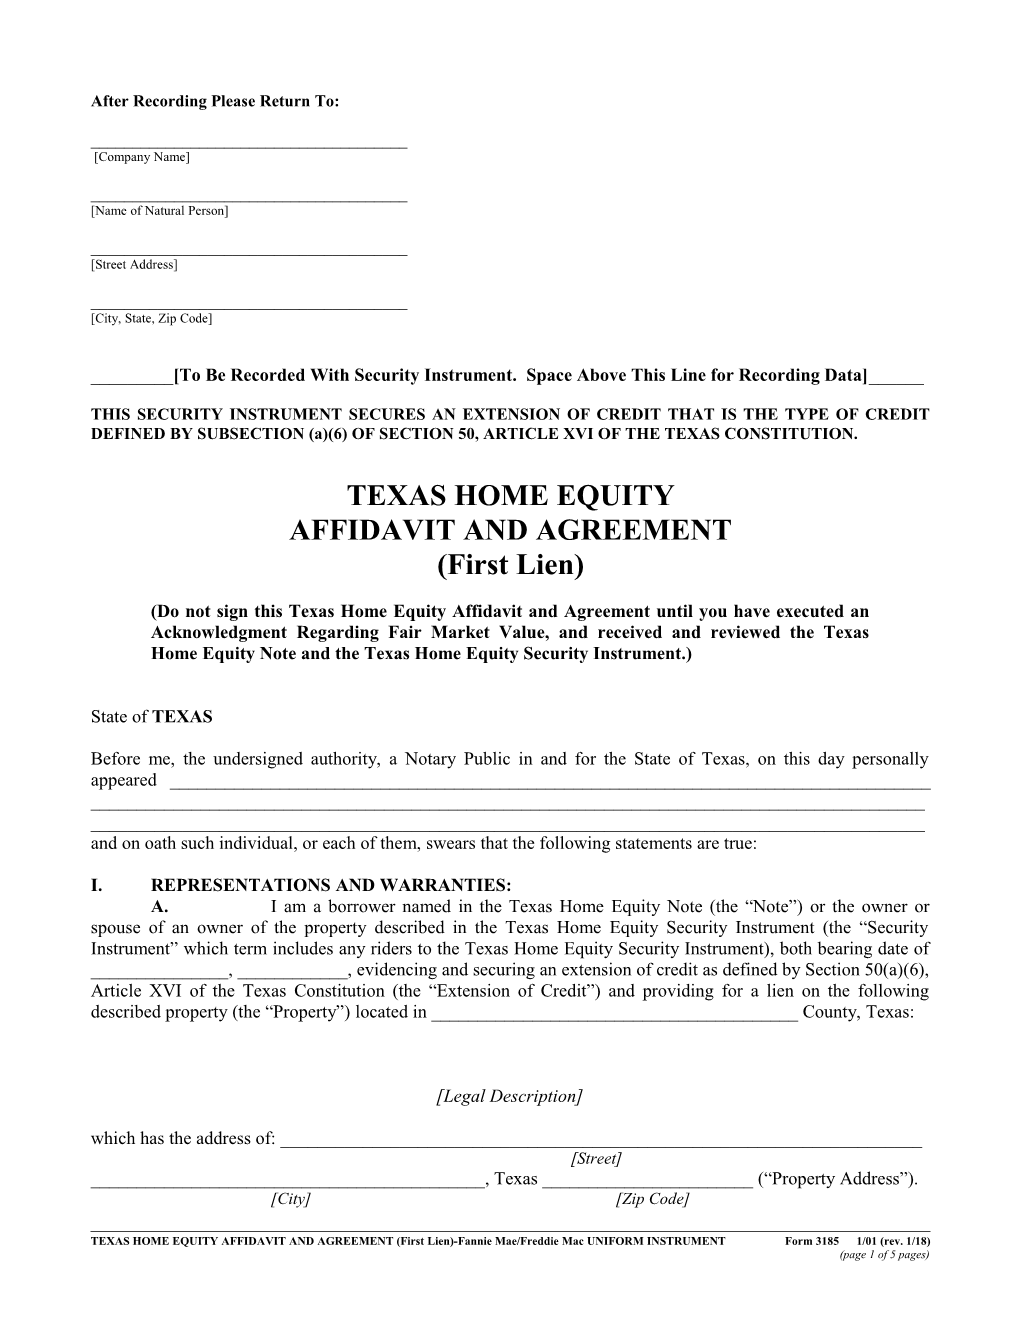 Form 3185 - Texas Home Equity Affidavit and Agreement